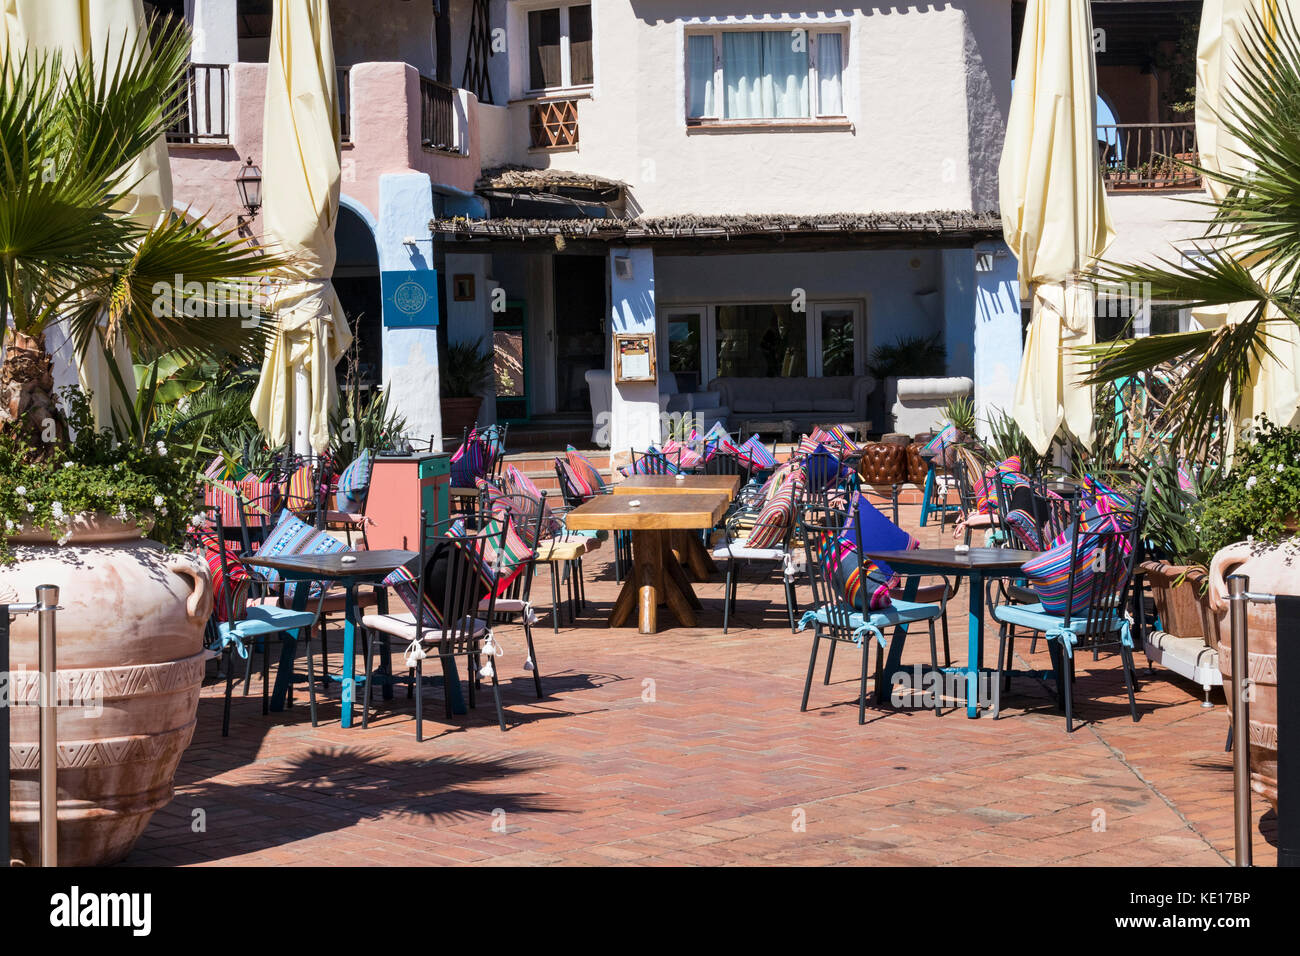 After Lunch: Restaurant Courtyard Seating Area with Colourful Cushions; A Grotto-Style Building. Porto Cervo, Costa Smerelda, Sardinia, Italy. Stock Photo